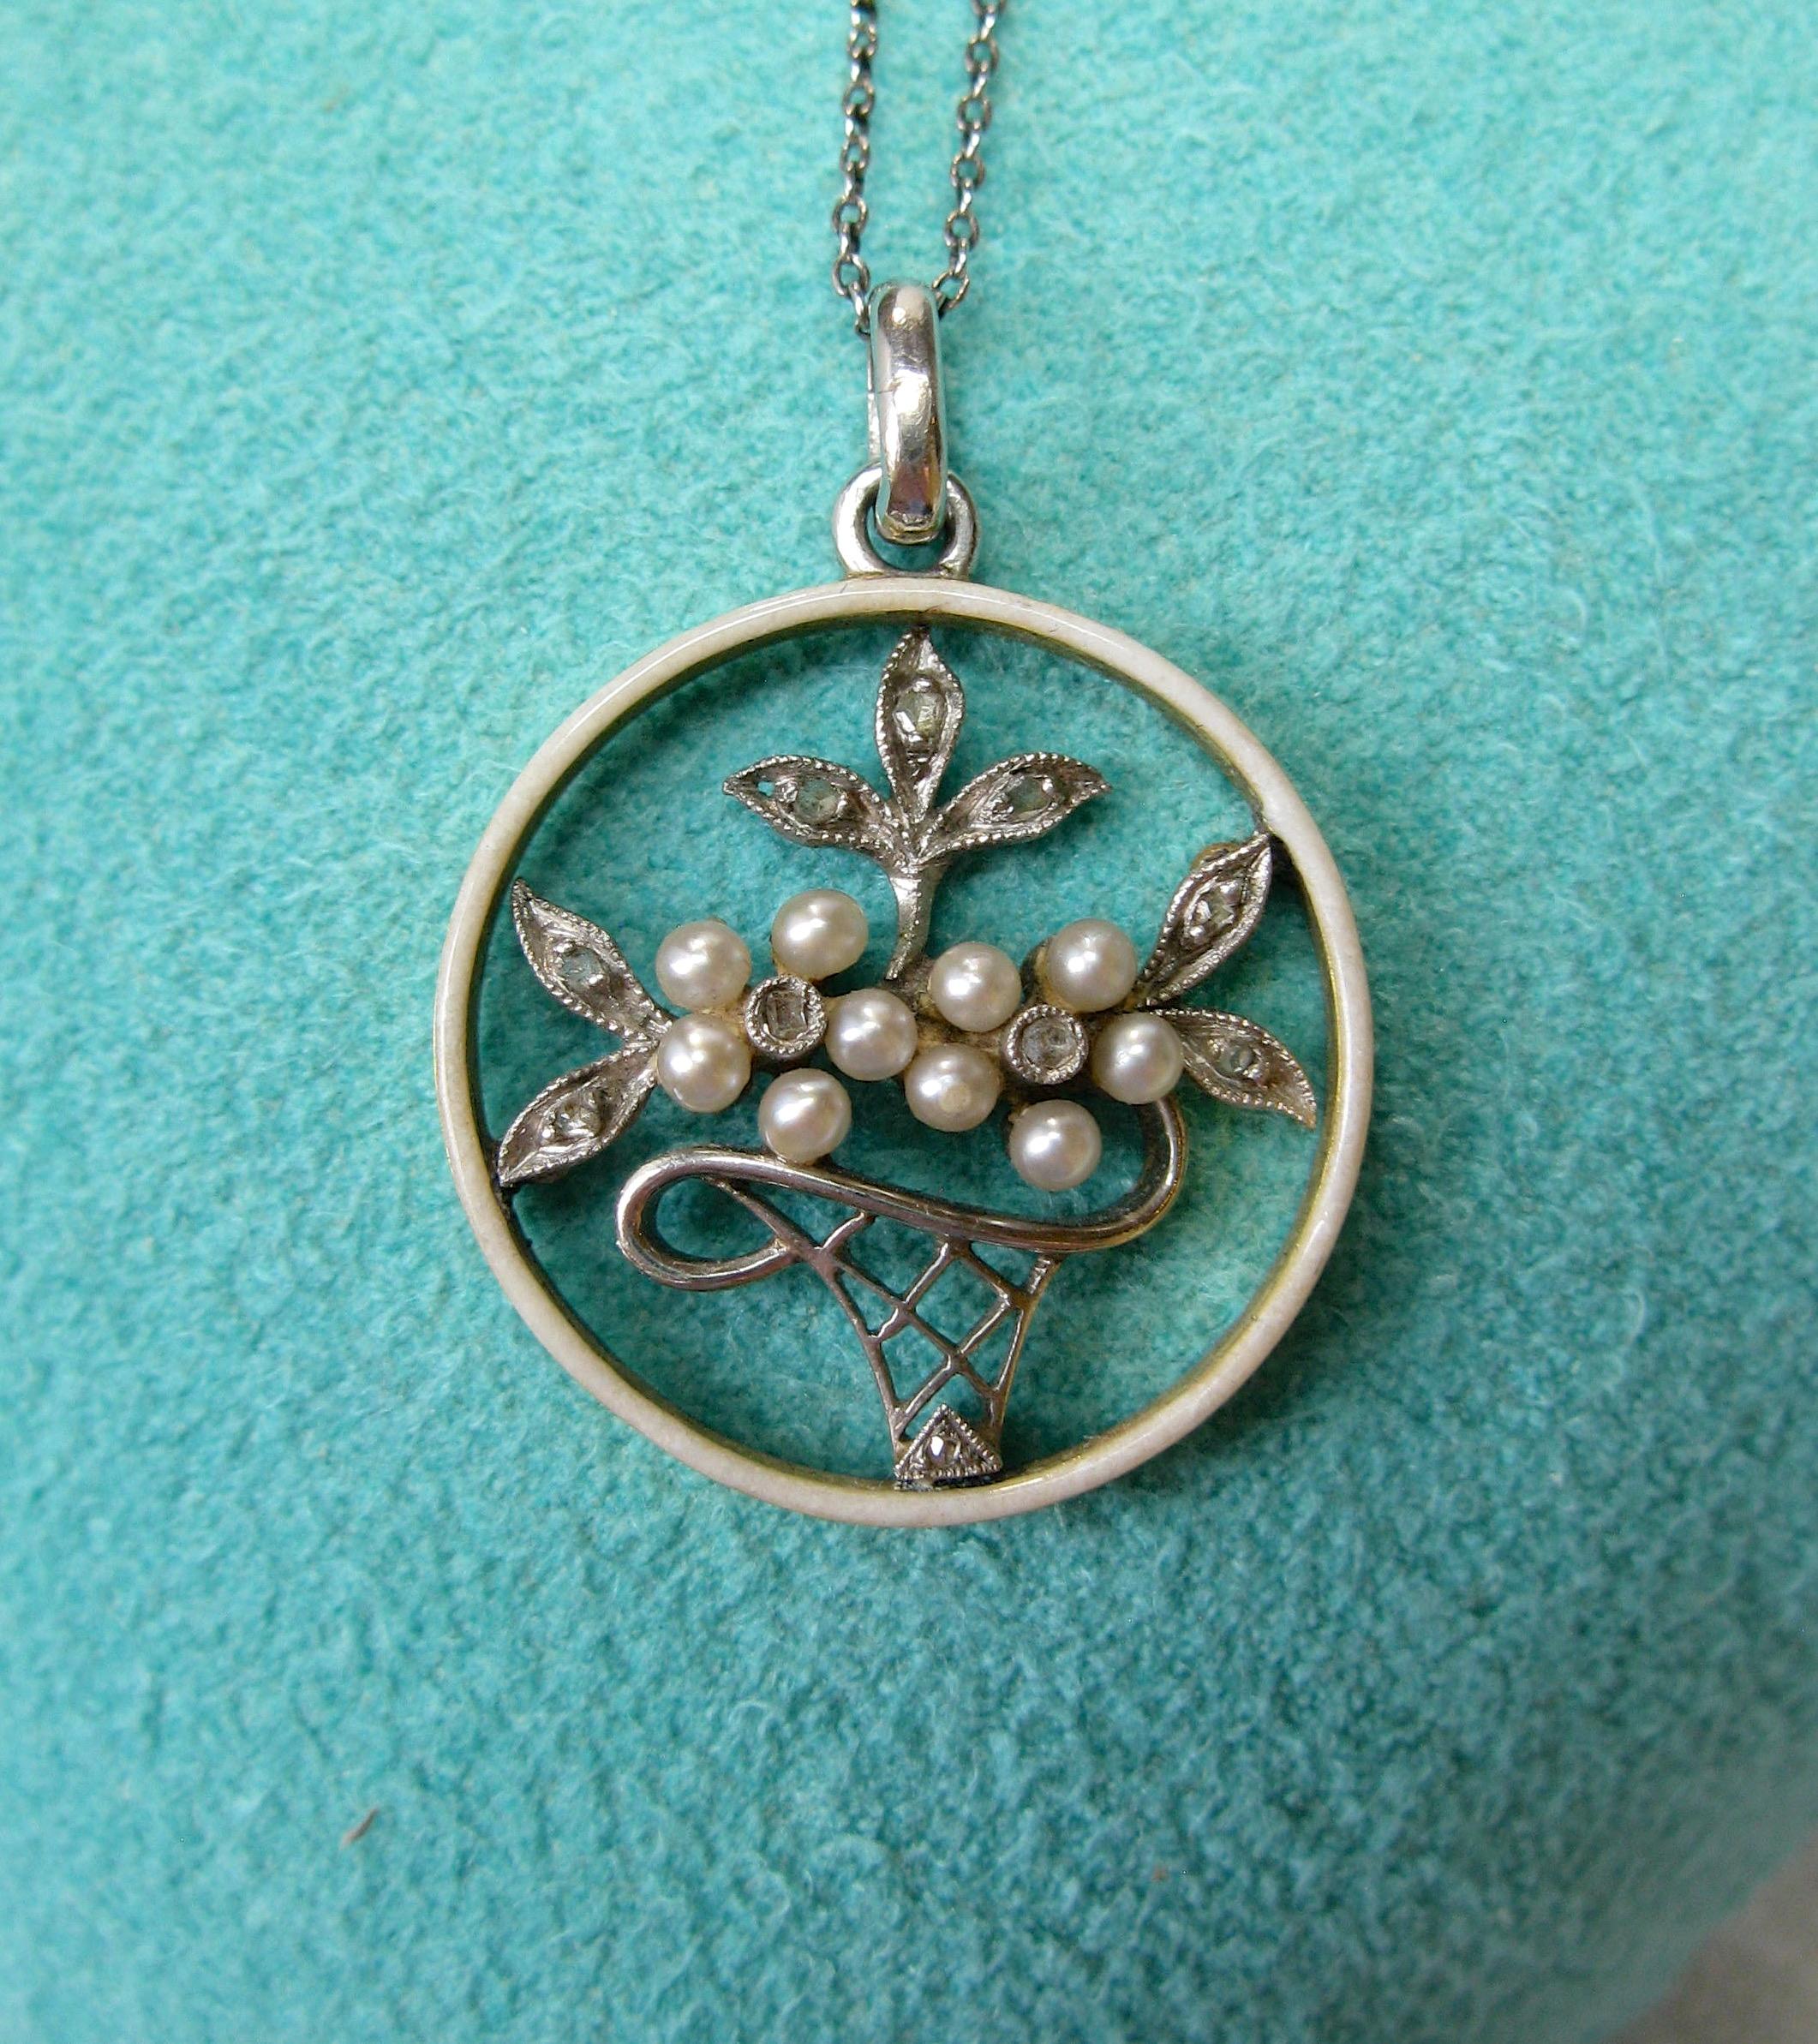 This is a stunning Rose Cut Diamond, Pearl, Platinum and Enamel pendant necklace in the form of a flower basket.  
The jewel is a museum quality antique Edwardian - Victorian necklace with delicate romantic grace and beauty.  The flower basket is